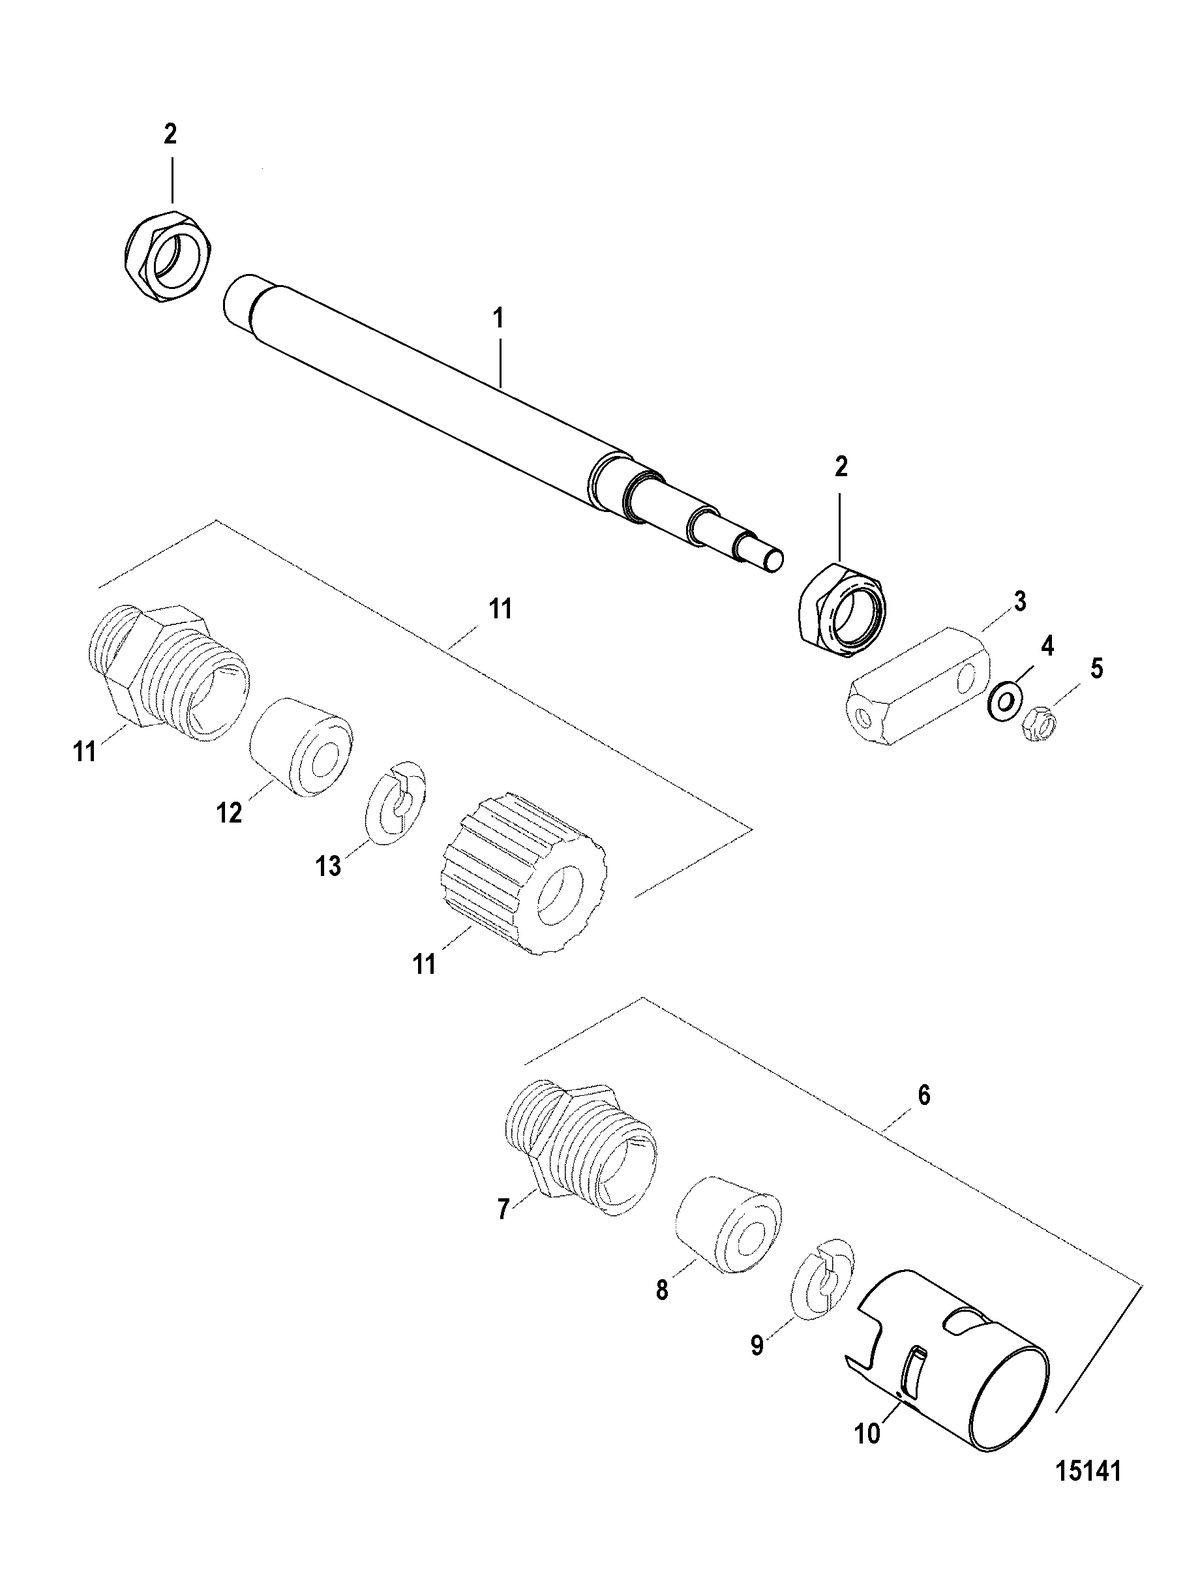 ACCESSORIES TRIM / TILT / LIFT SYSTEMS AND COMPONENTS Actuator Kit(845532A 1 and 845630A 1)